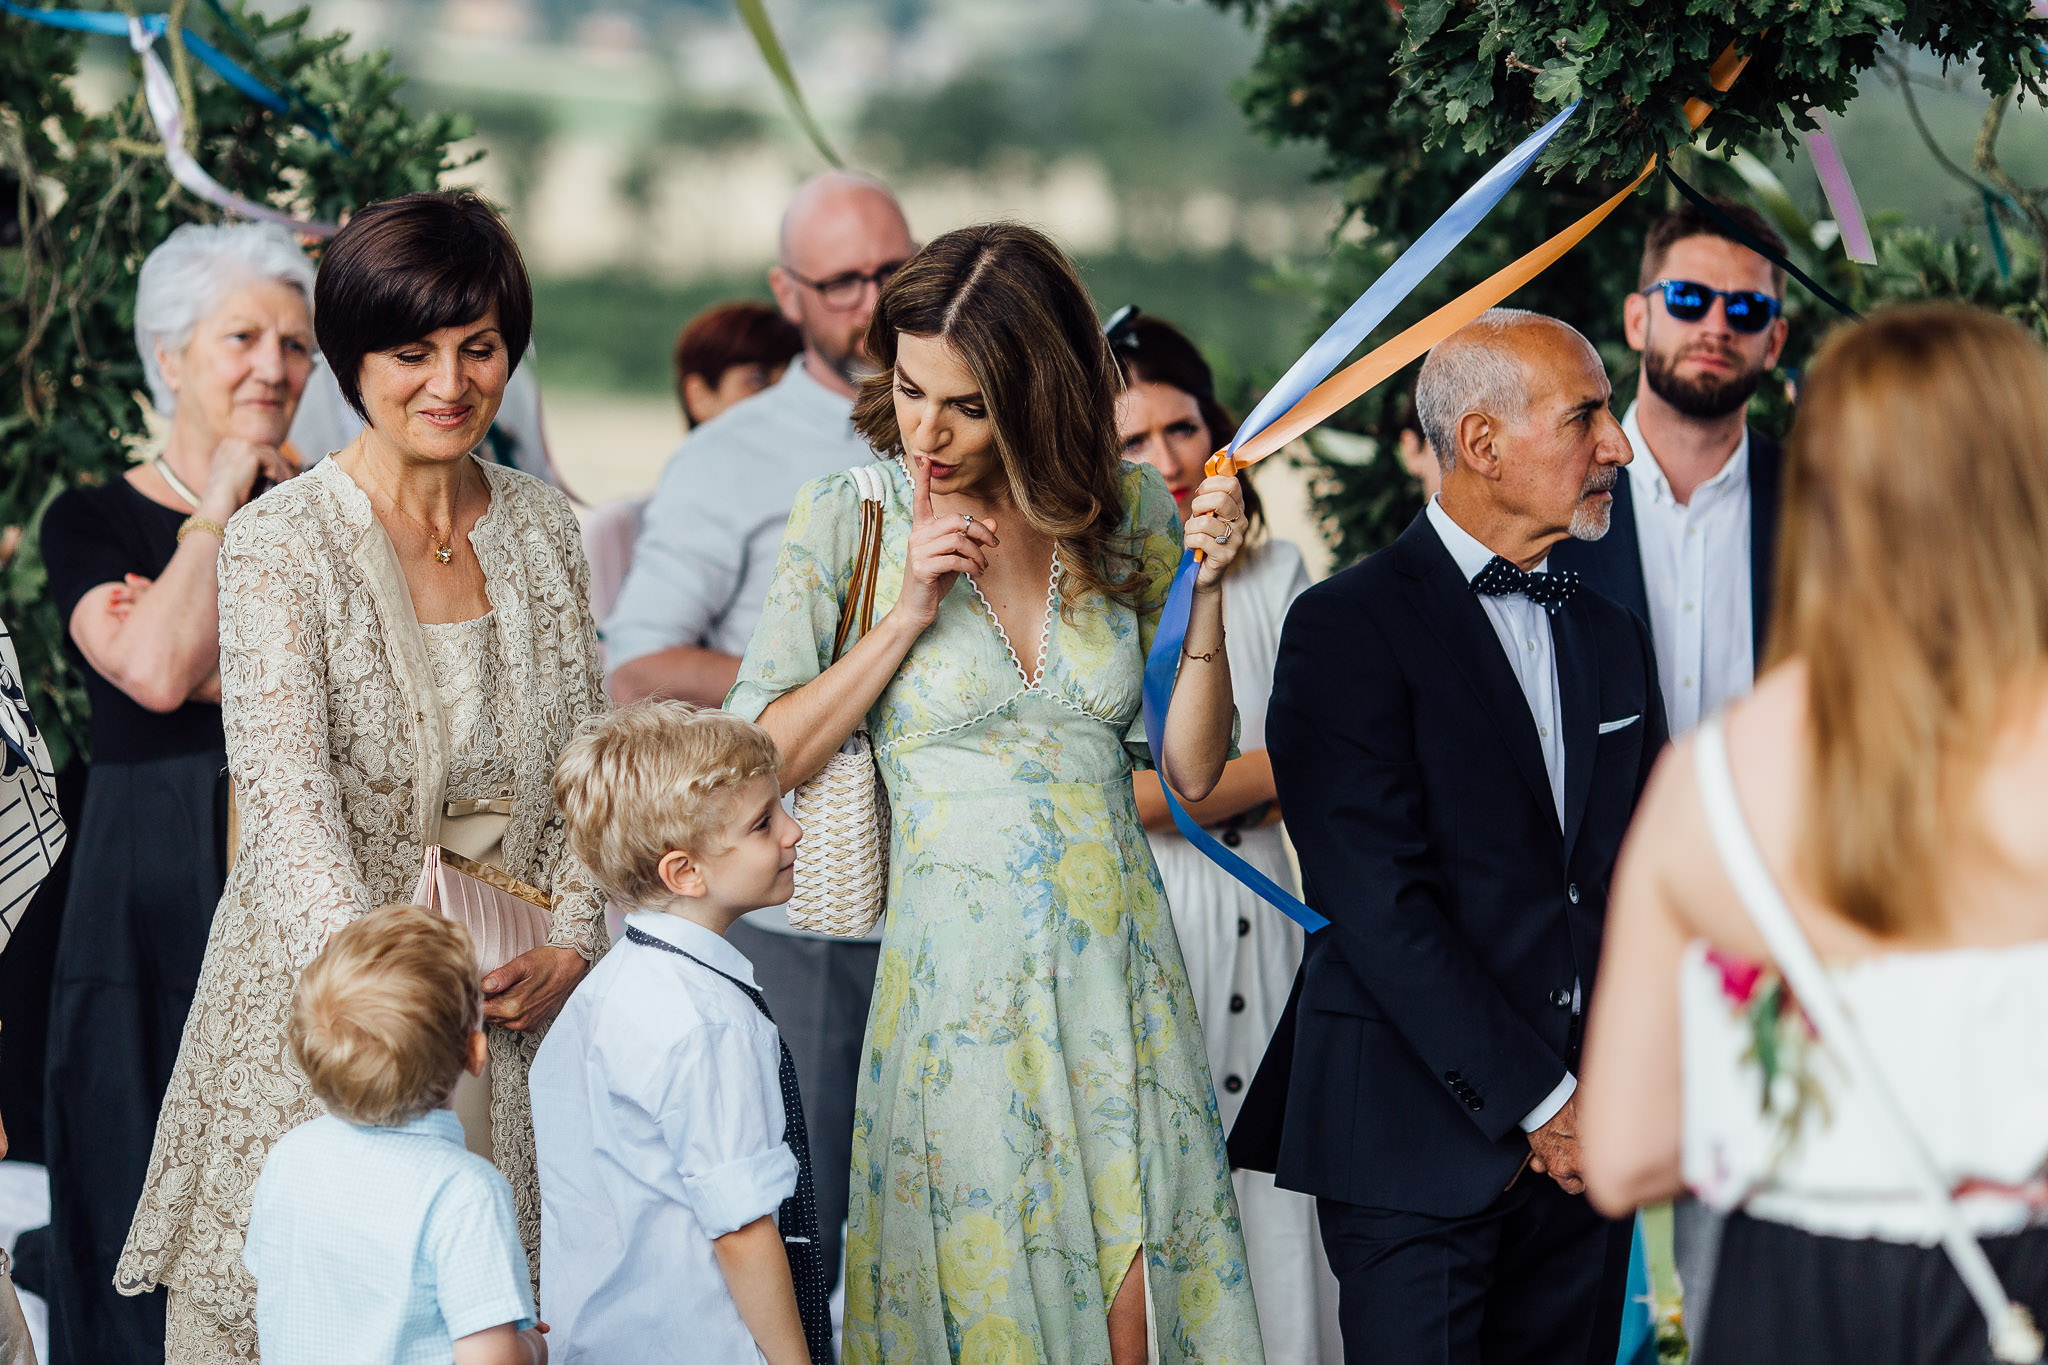 outdoor wedding inspiration in italy